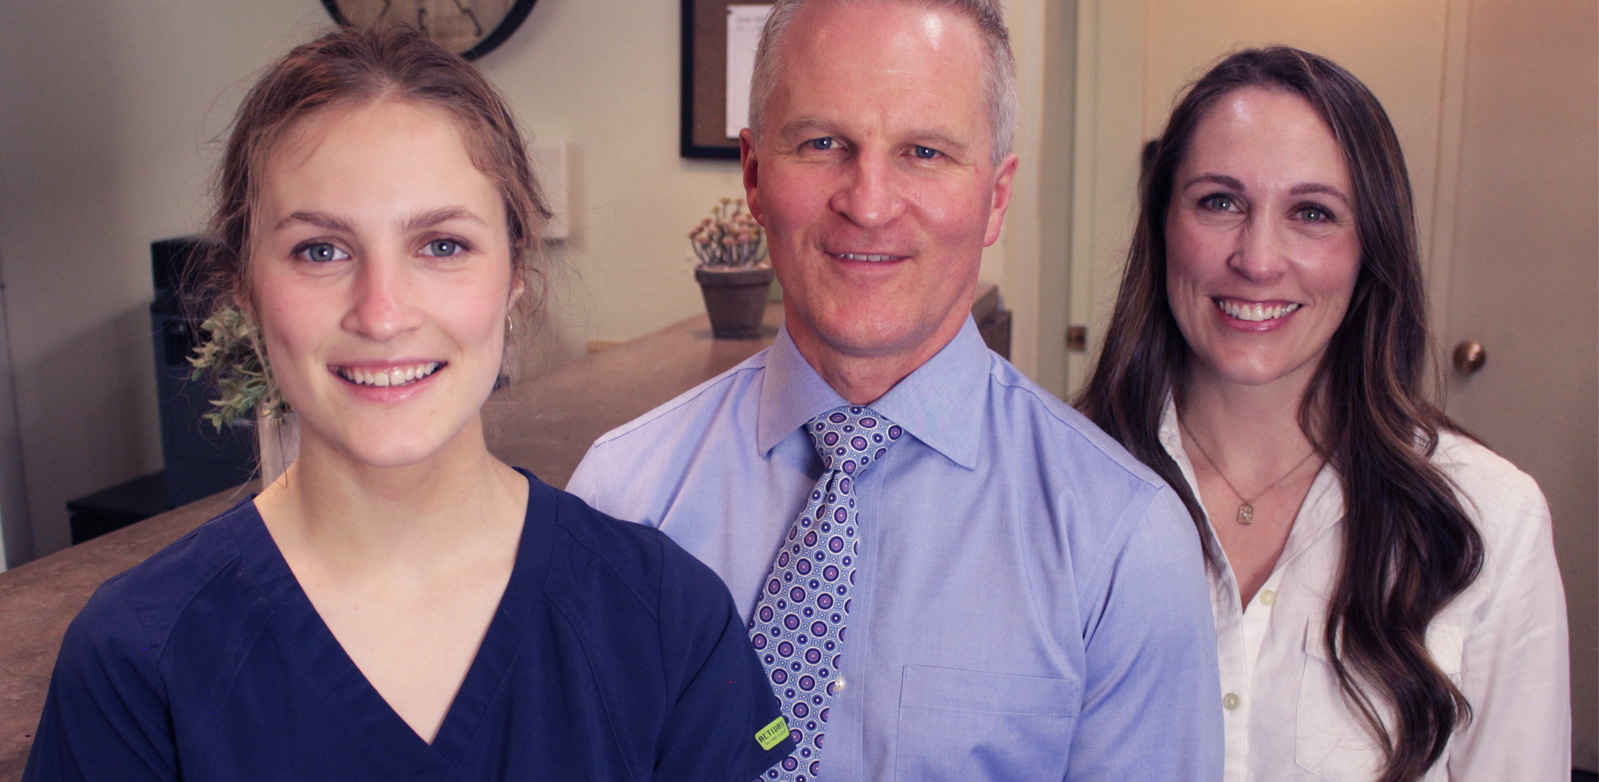 Lawrence Chiropractic team